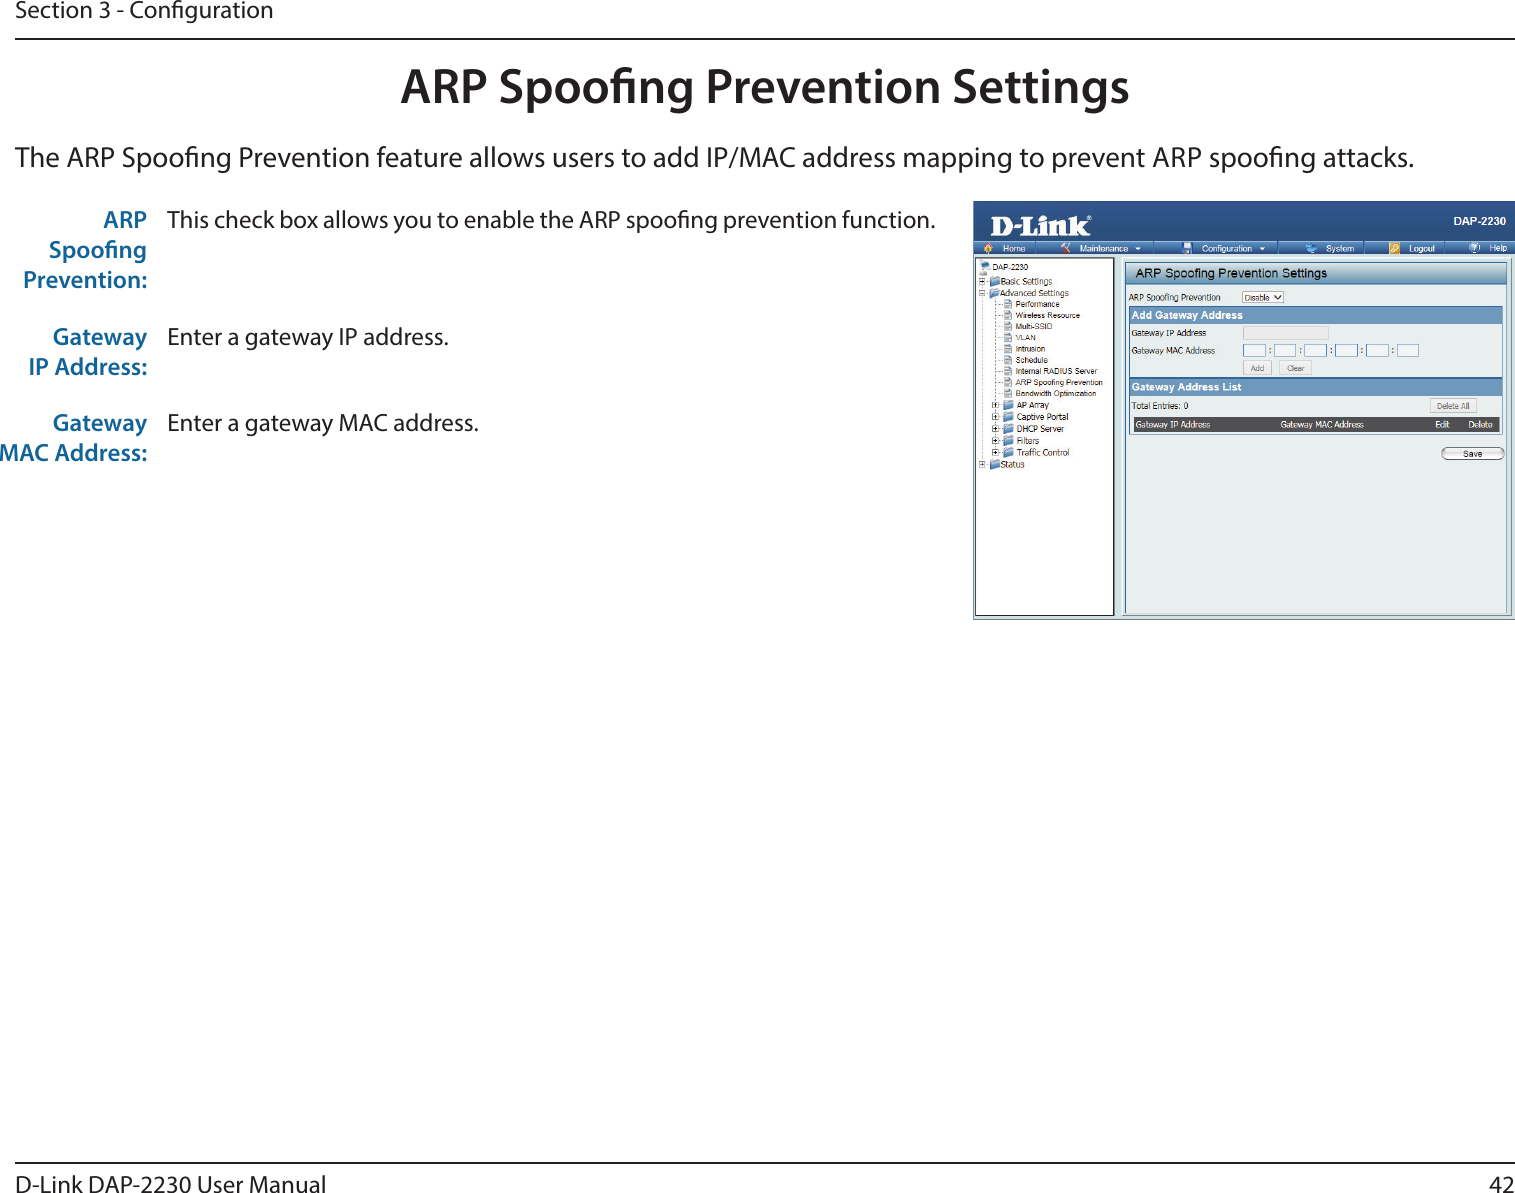 42D-Link DAP-2230 User ManualSection 3 - CongurationARP Spoong Prevention SettingsThe ARP Spoong Prevention feature allows users to add IP/MAC address mapping to prevent ARP spoong attacks.ARP Spoong Prevention:This check box allows you to enable the ARP spoong prevention function. Gateway IP Address:Enter a gateway IP address. Gateway MAC Address:Enter a gateway MAC address. 